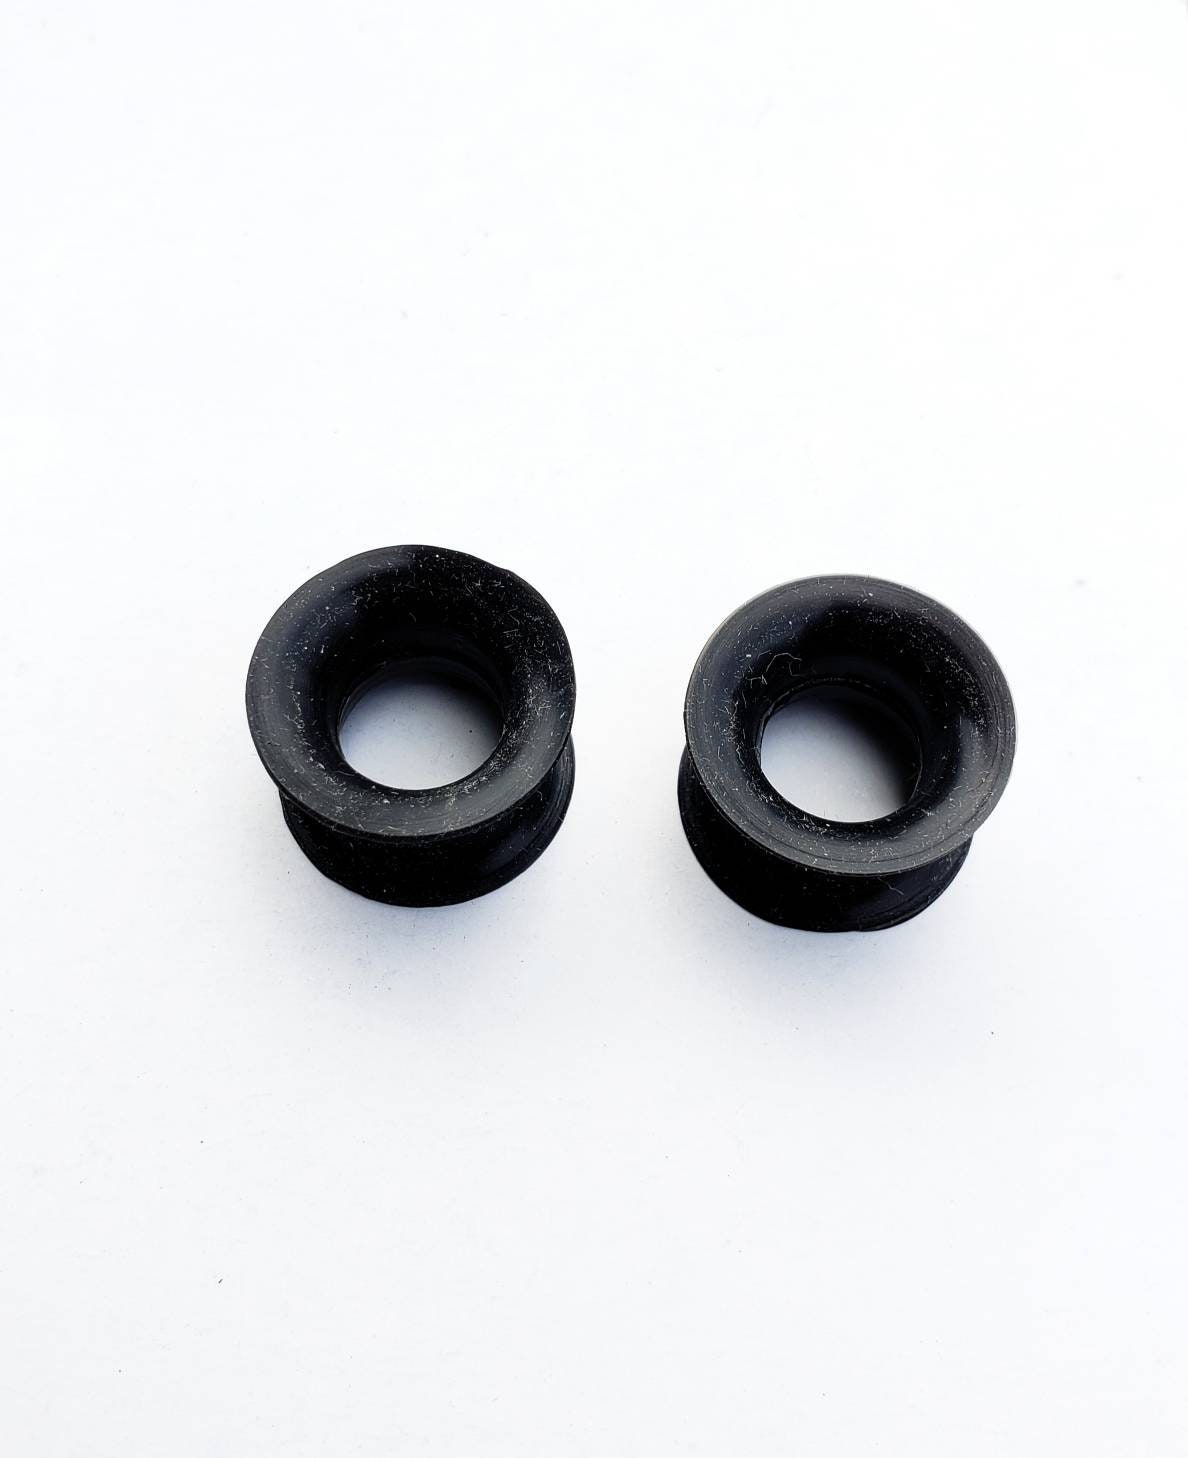 Black Silicone Plugs Squishy Tunnels Double Flared Gauges - Etsy